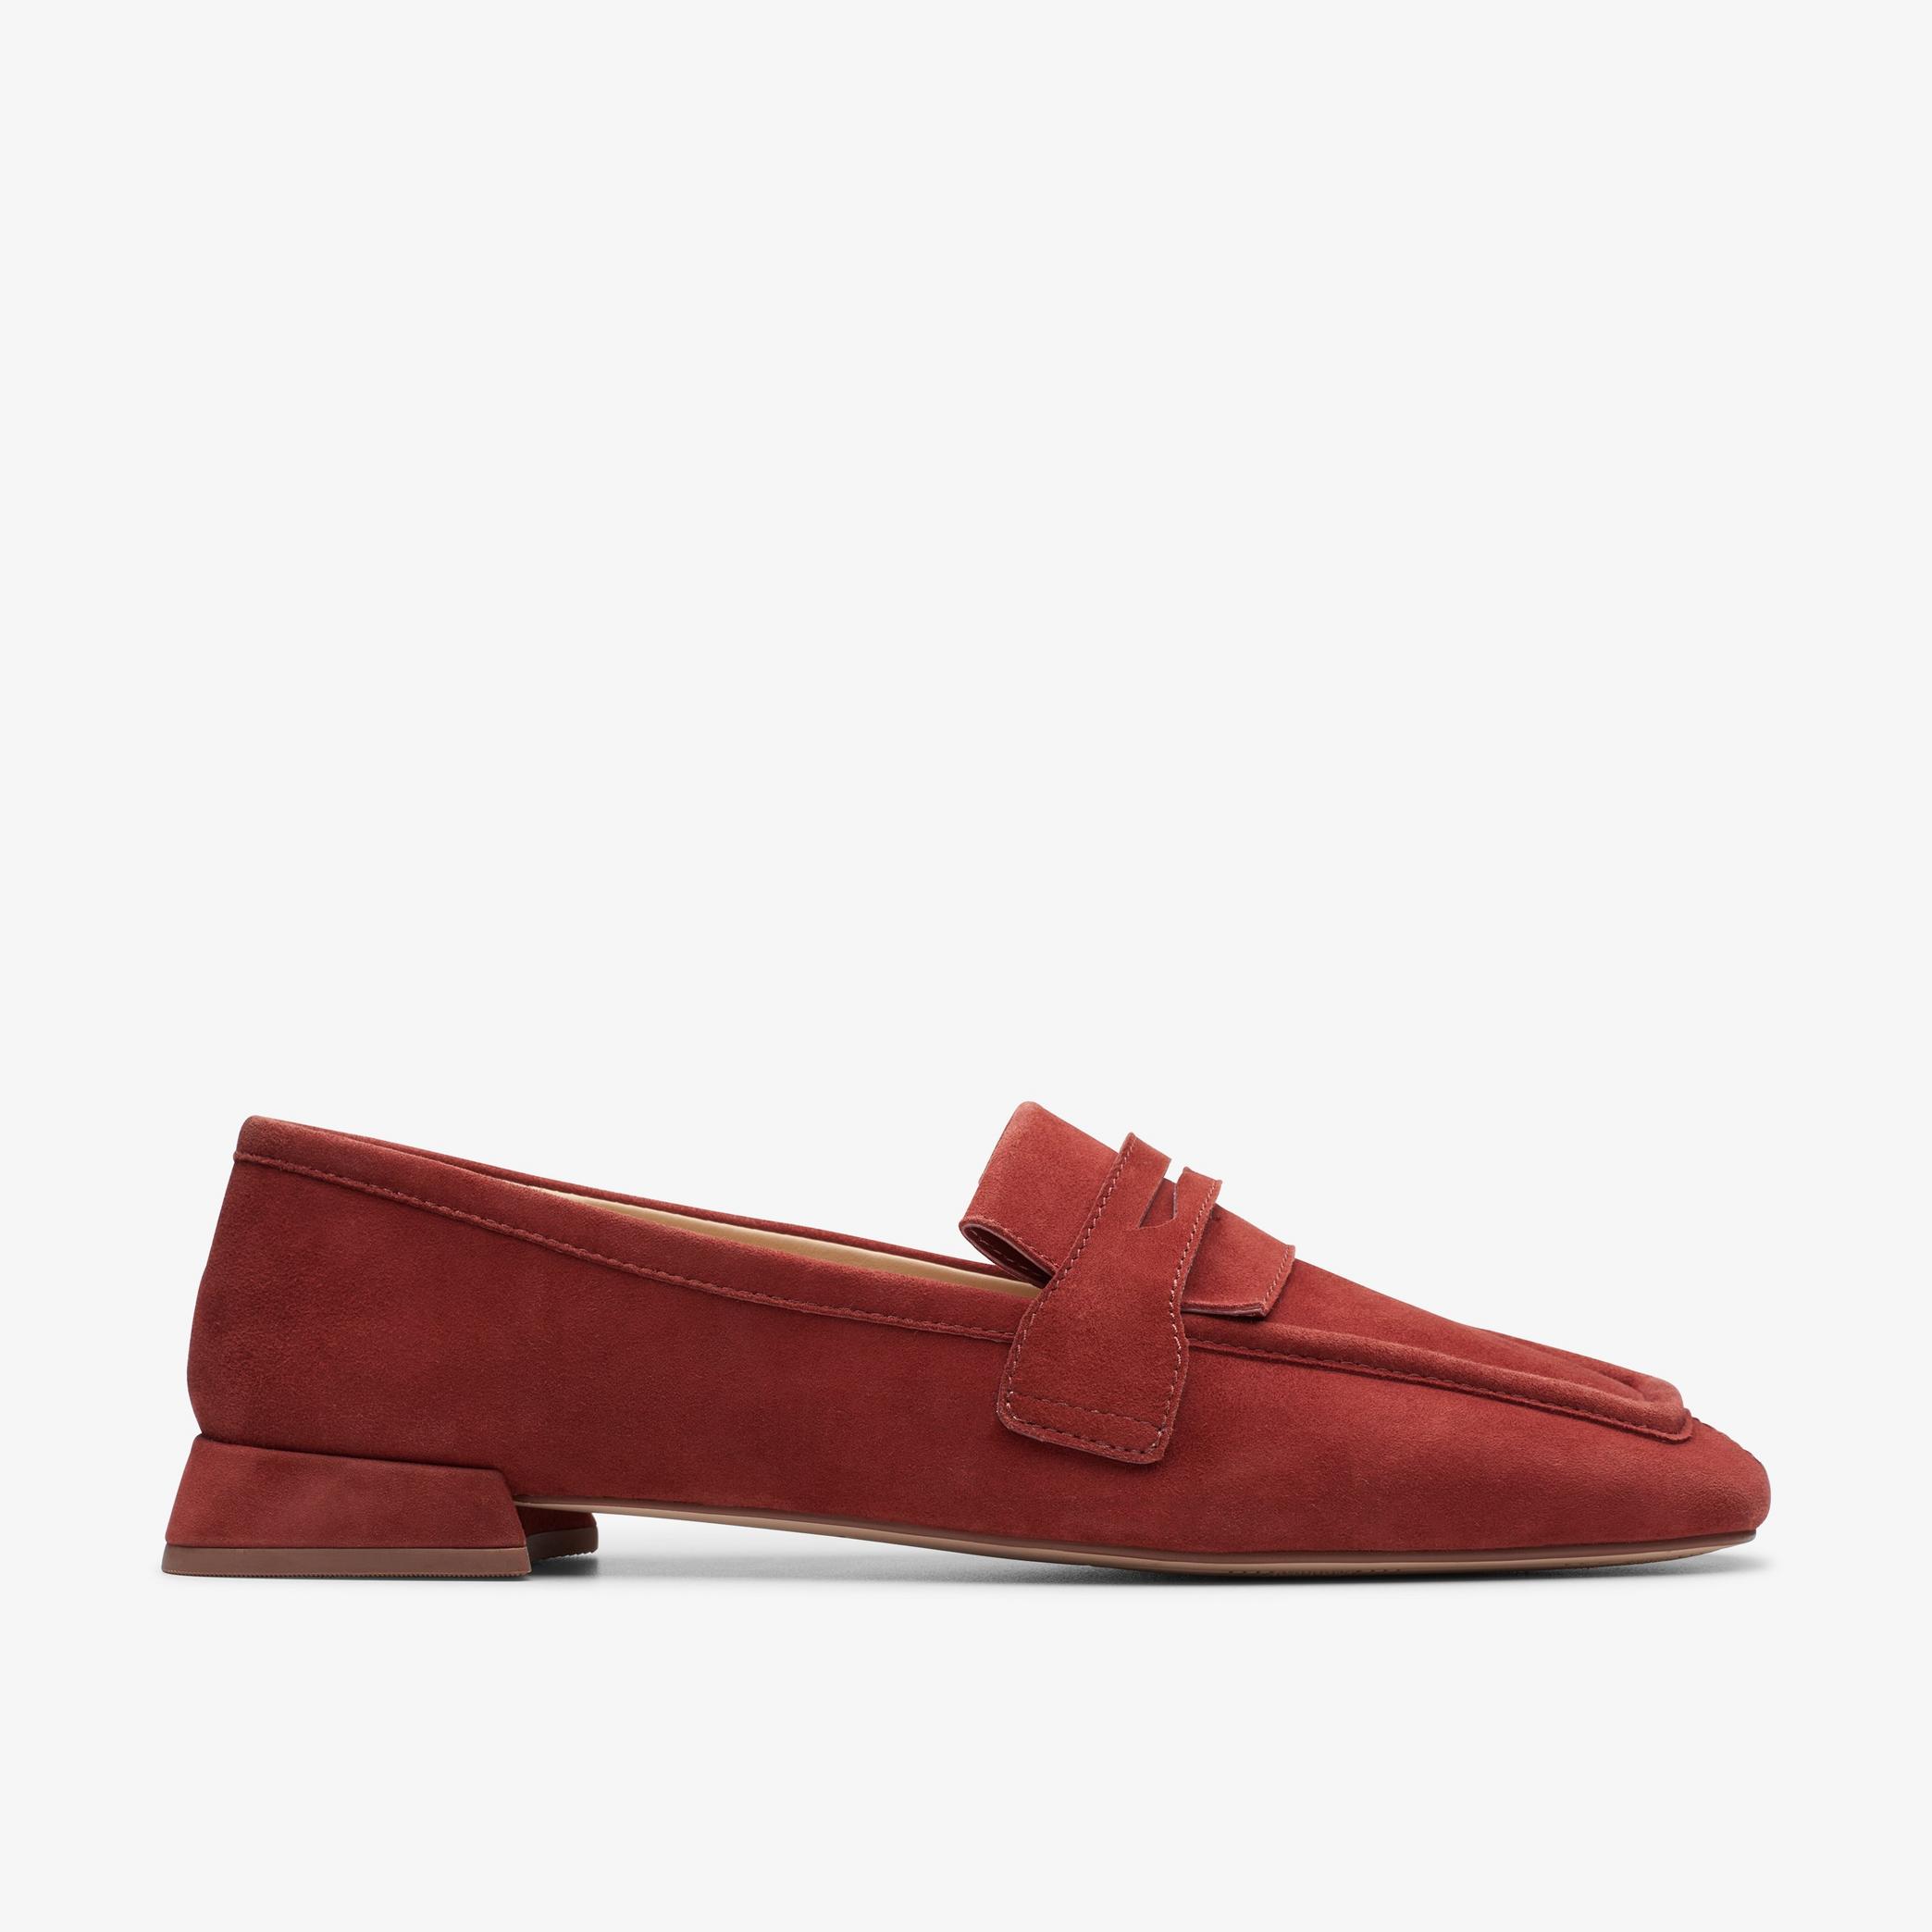 Ubree15 Surf Chestnut Suede Loafers, view 1 of 7